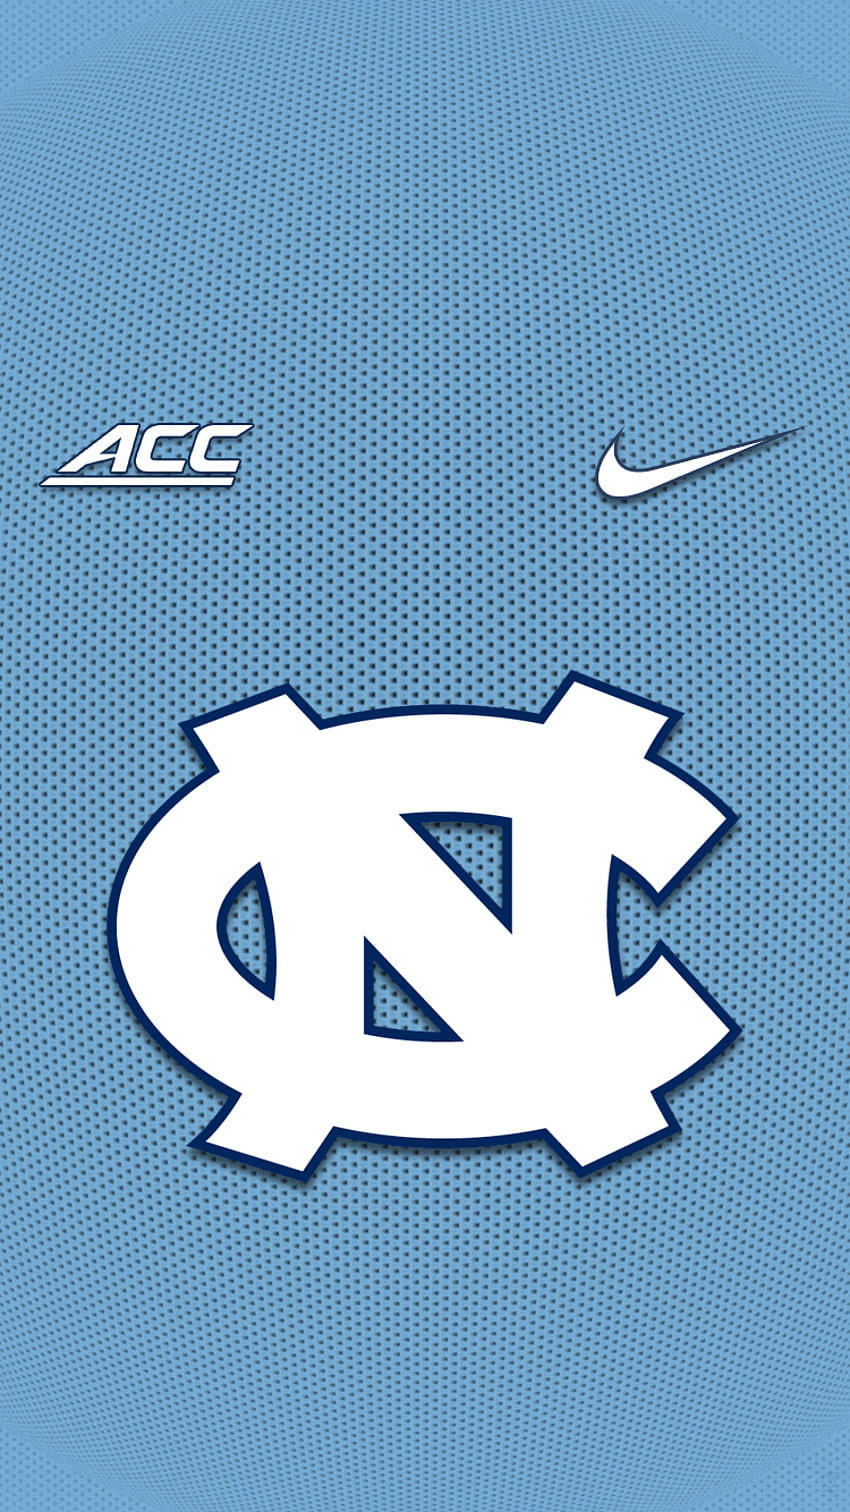 North Carolina is in the Final Four and you need these shirts